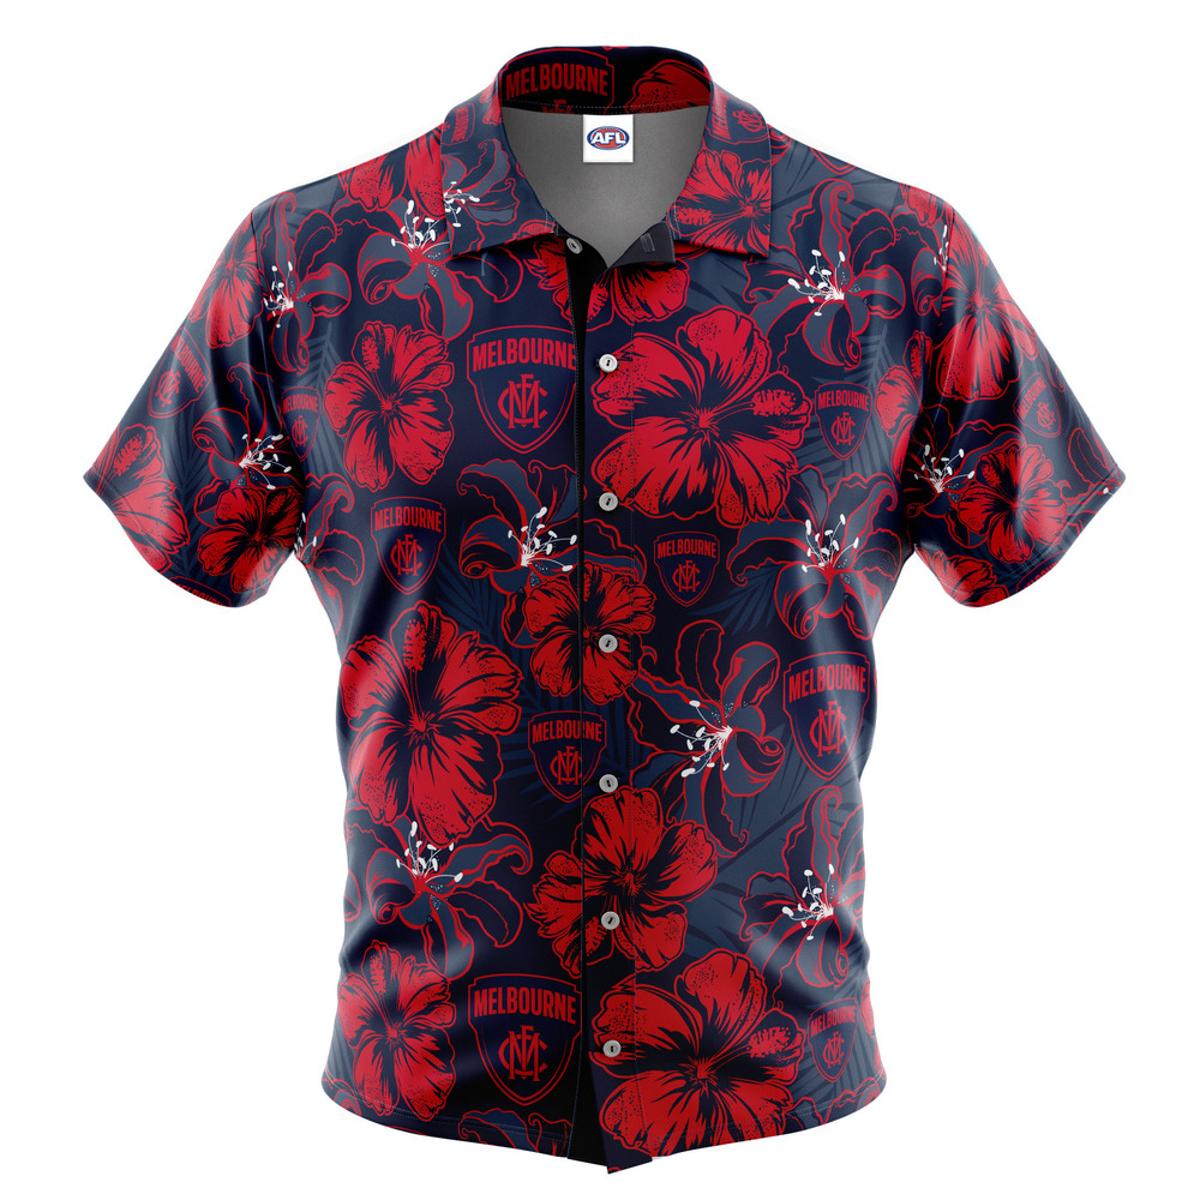 Afl Melbourne Demons Summer Palm Tree Tropical Hawaiian Shirt Size From S To 5xl